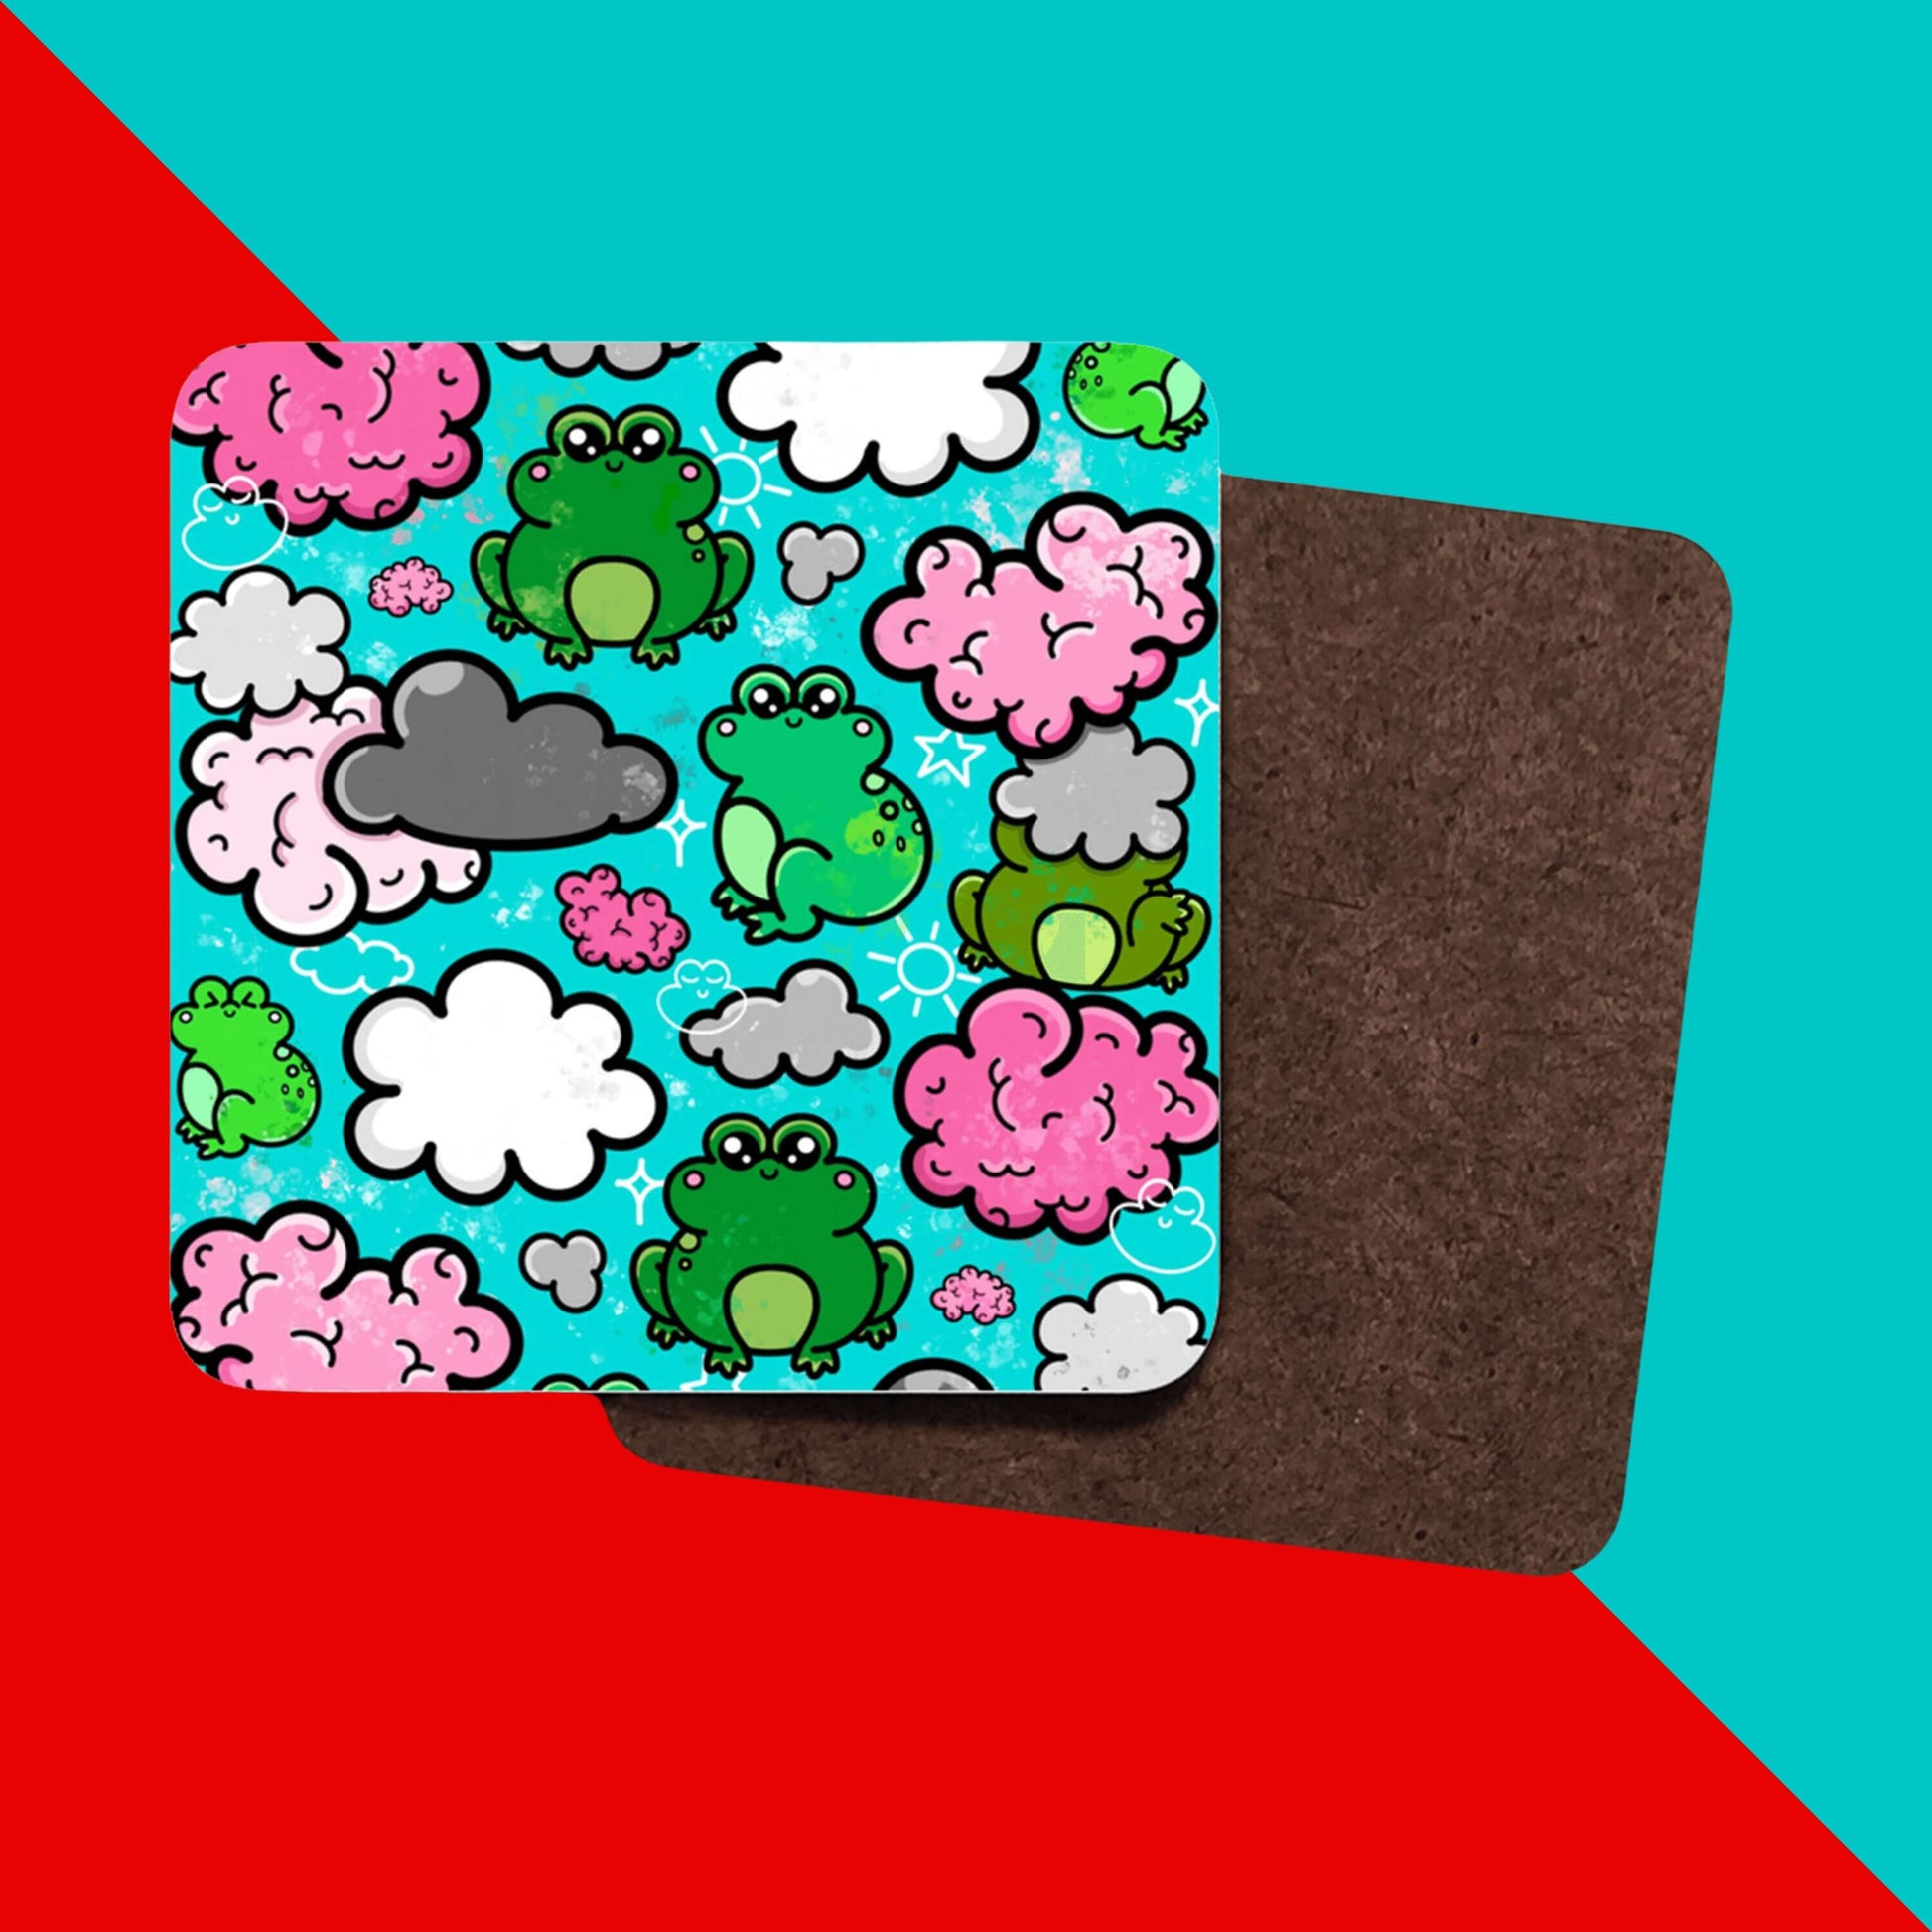 The Brain Frog Coaster - Brain Fog on a red and blue background. The wooden coaster features various happy kawaii face green frogs with pink brain style, grey and white clouds with white sparkles on a blue background. The design was created to raise awareness for brain fog.